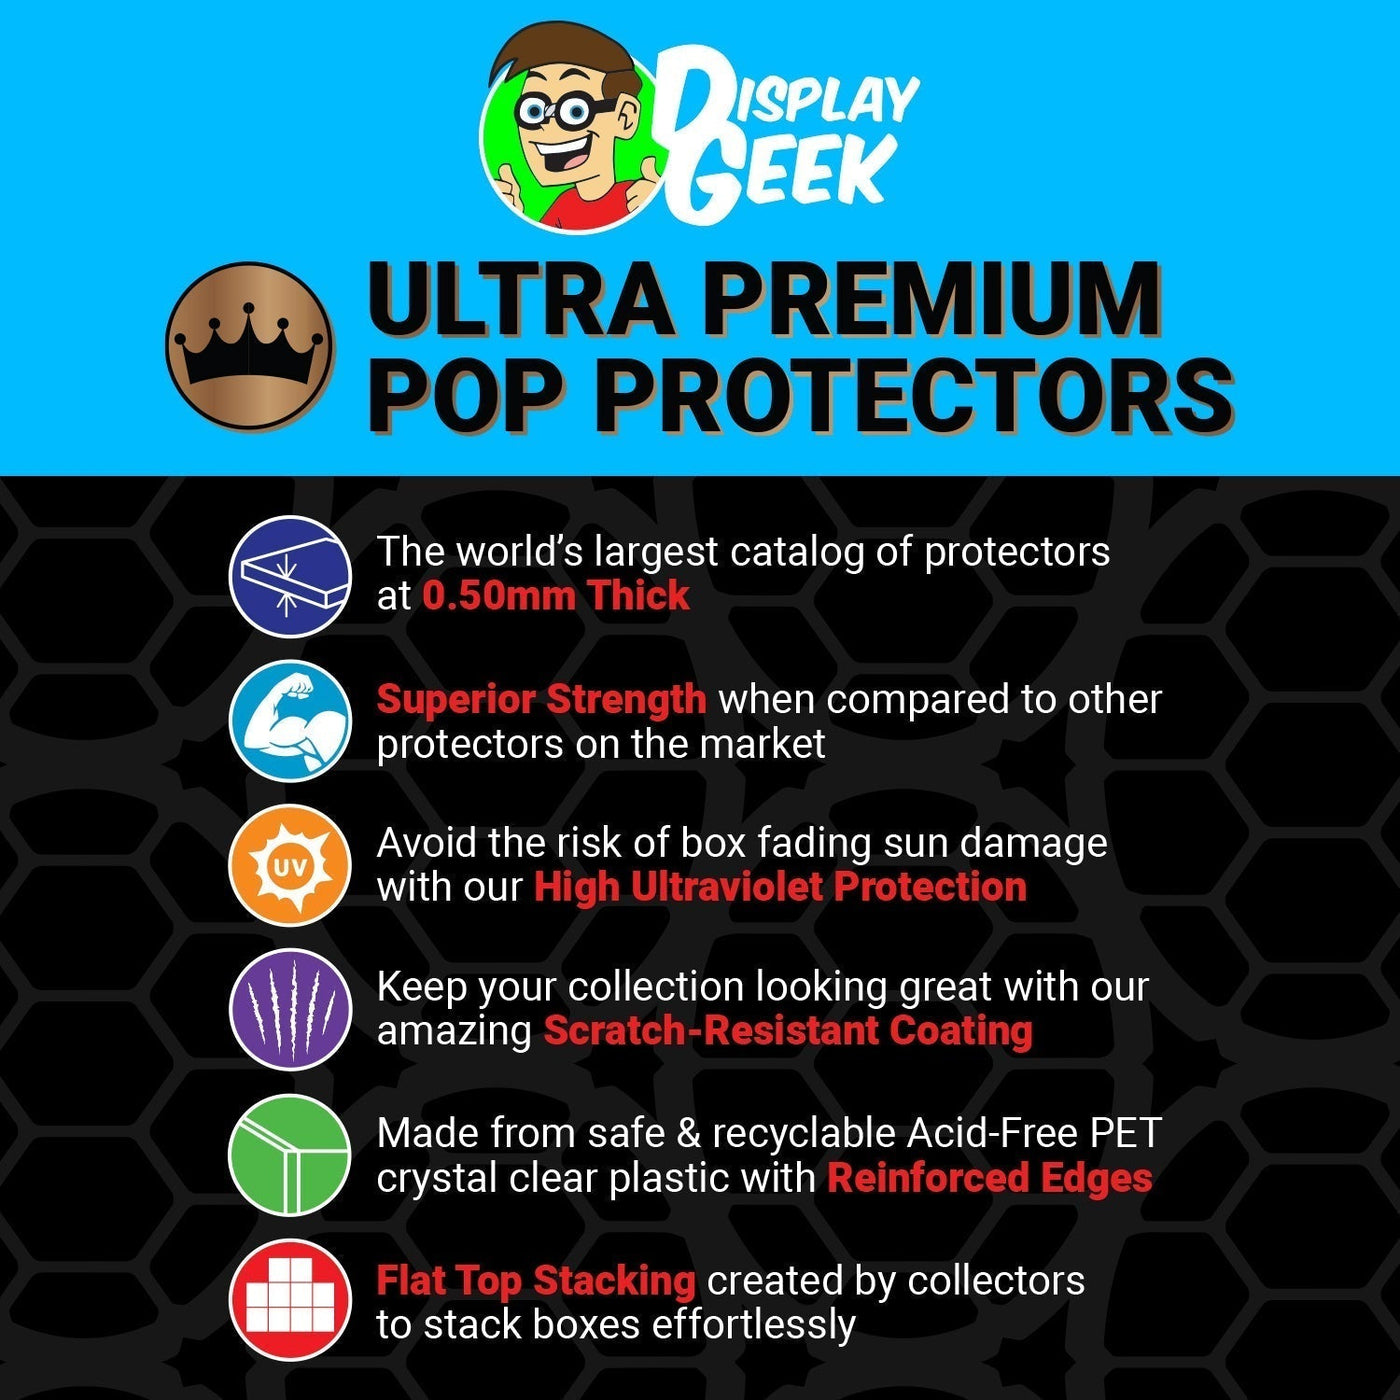 Pop Protector for Funkoverse Aggretsuko Game 100 Funko Expansion on The Protector Guide App by Display Geek